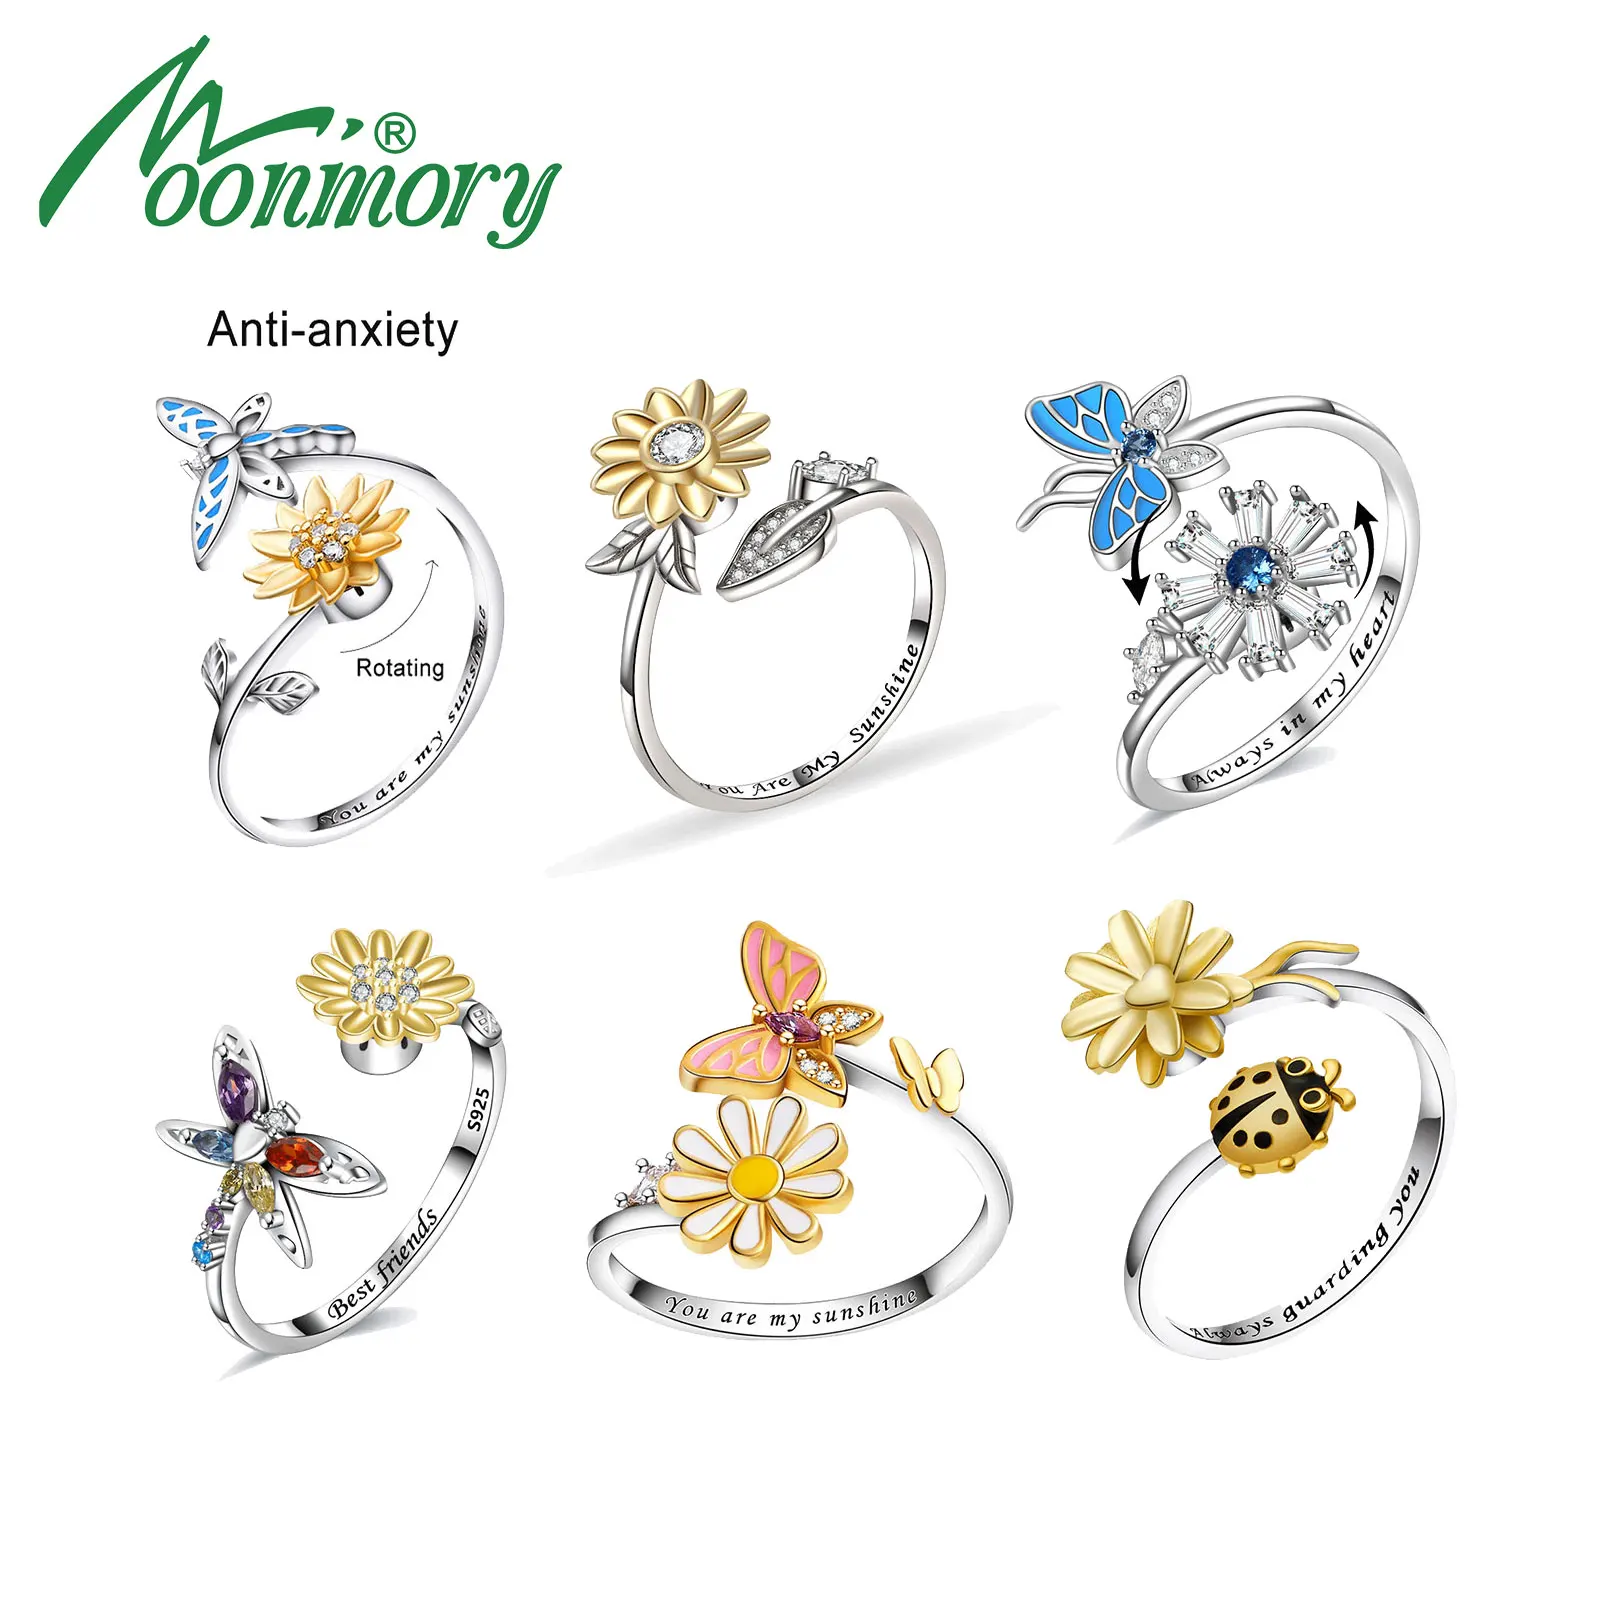 Moonmory 925 Sterling Silver Women's Anxiety Ring Rotating Opening Ring Sunshine Flower Enamel Butterfly Relieving Stress Rings